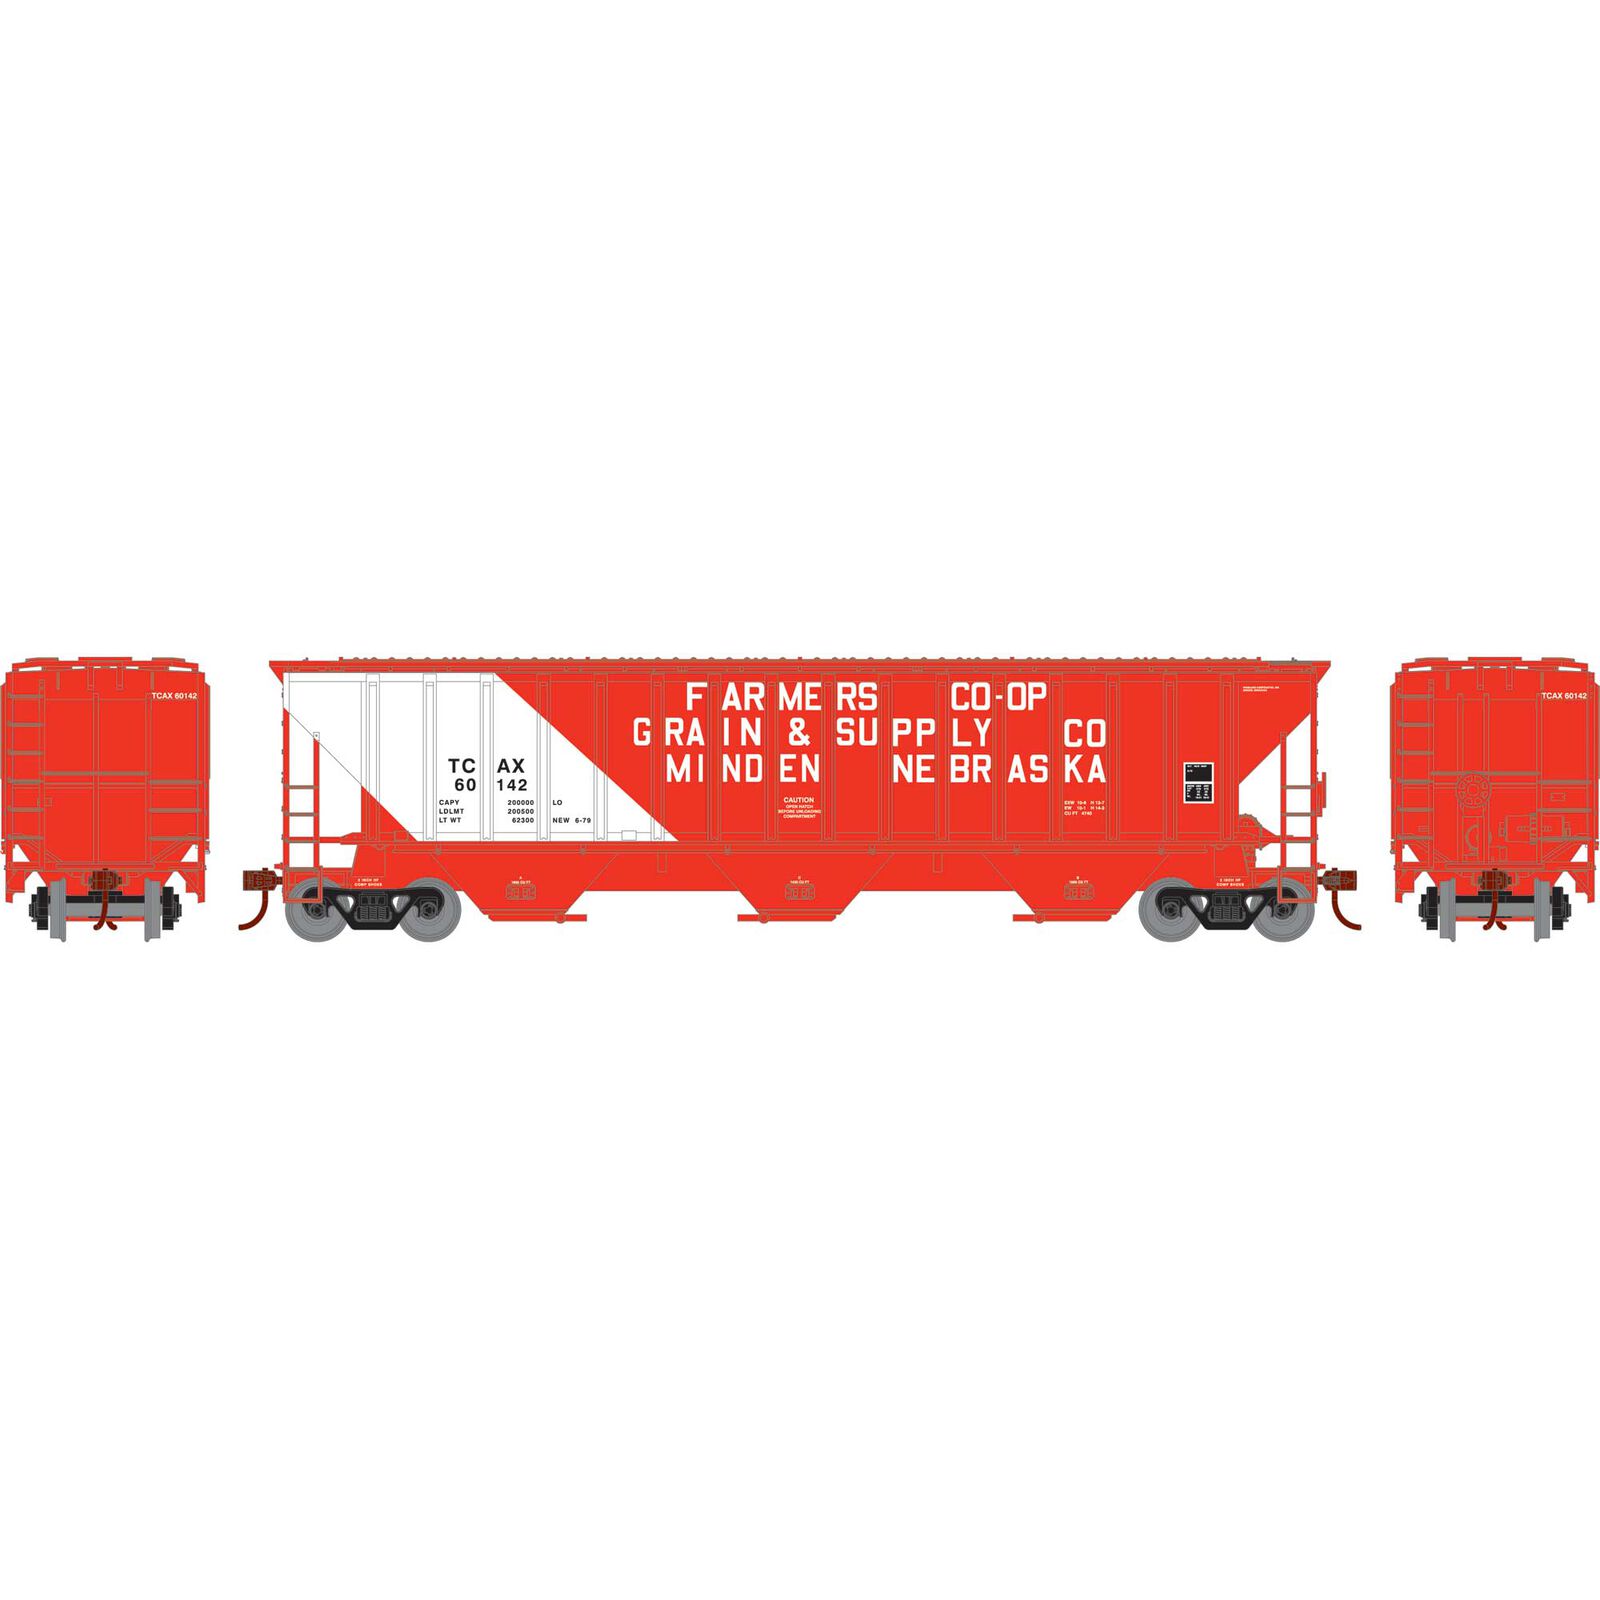 HO PS4740 Covered Hopper, TCAX #60142